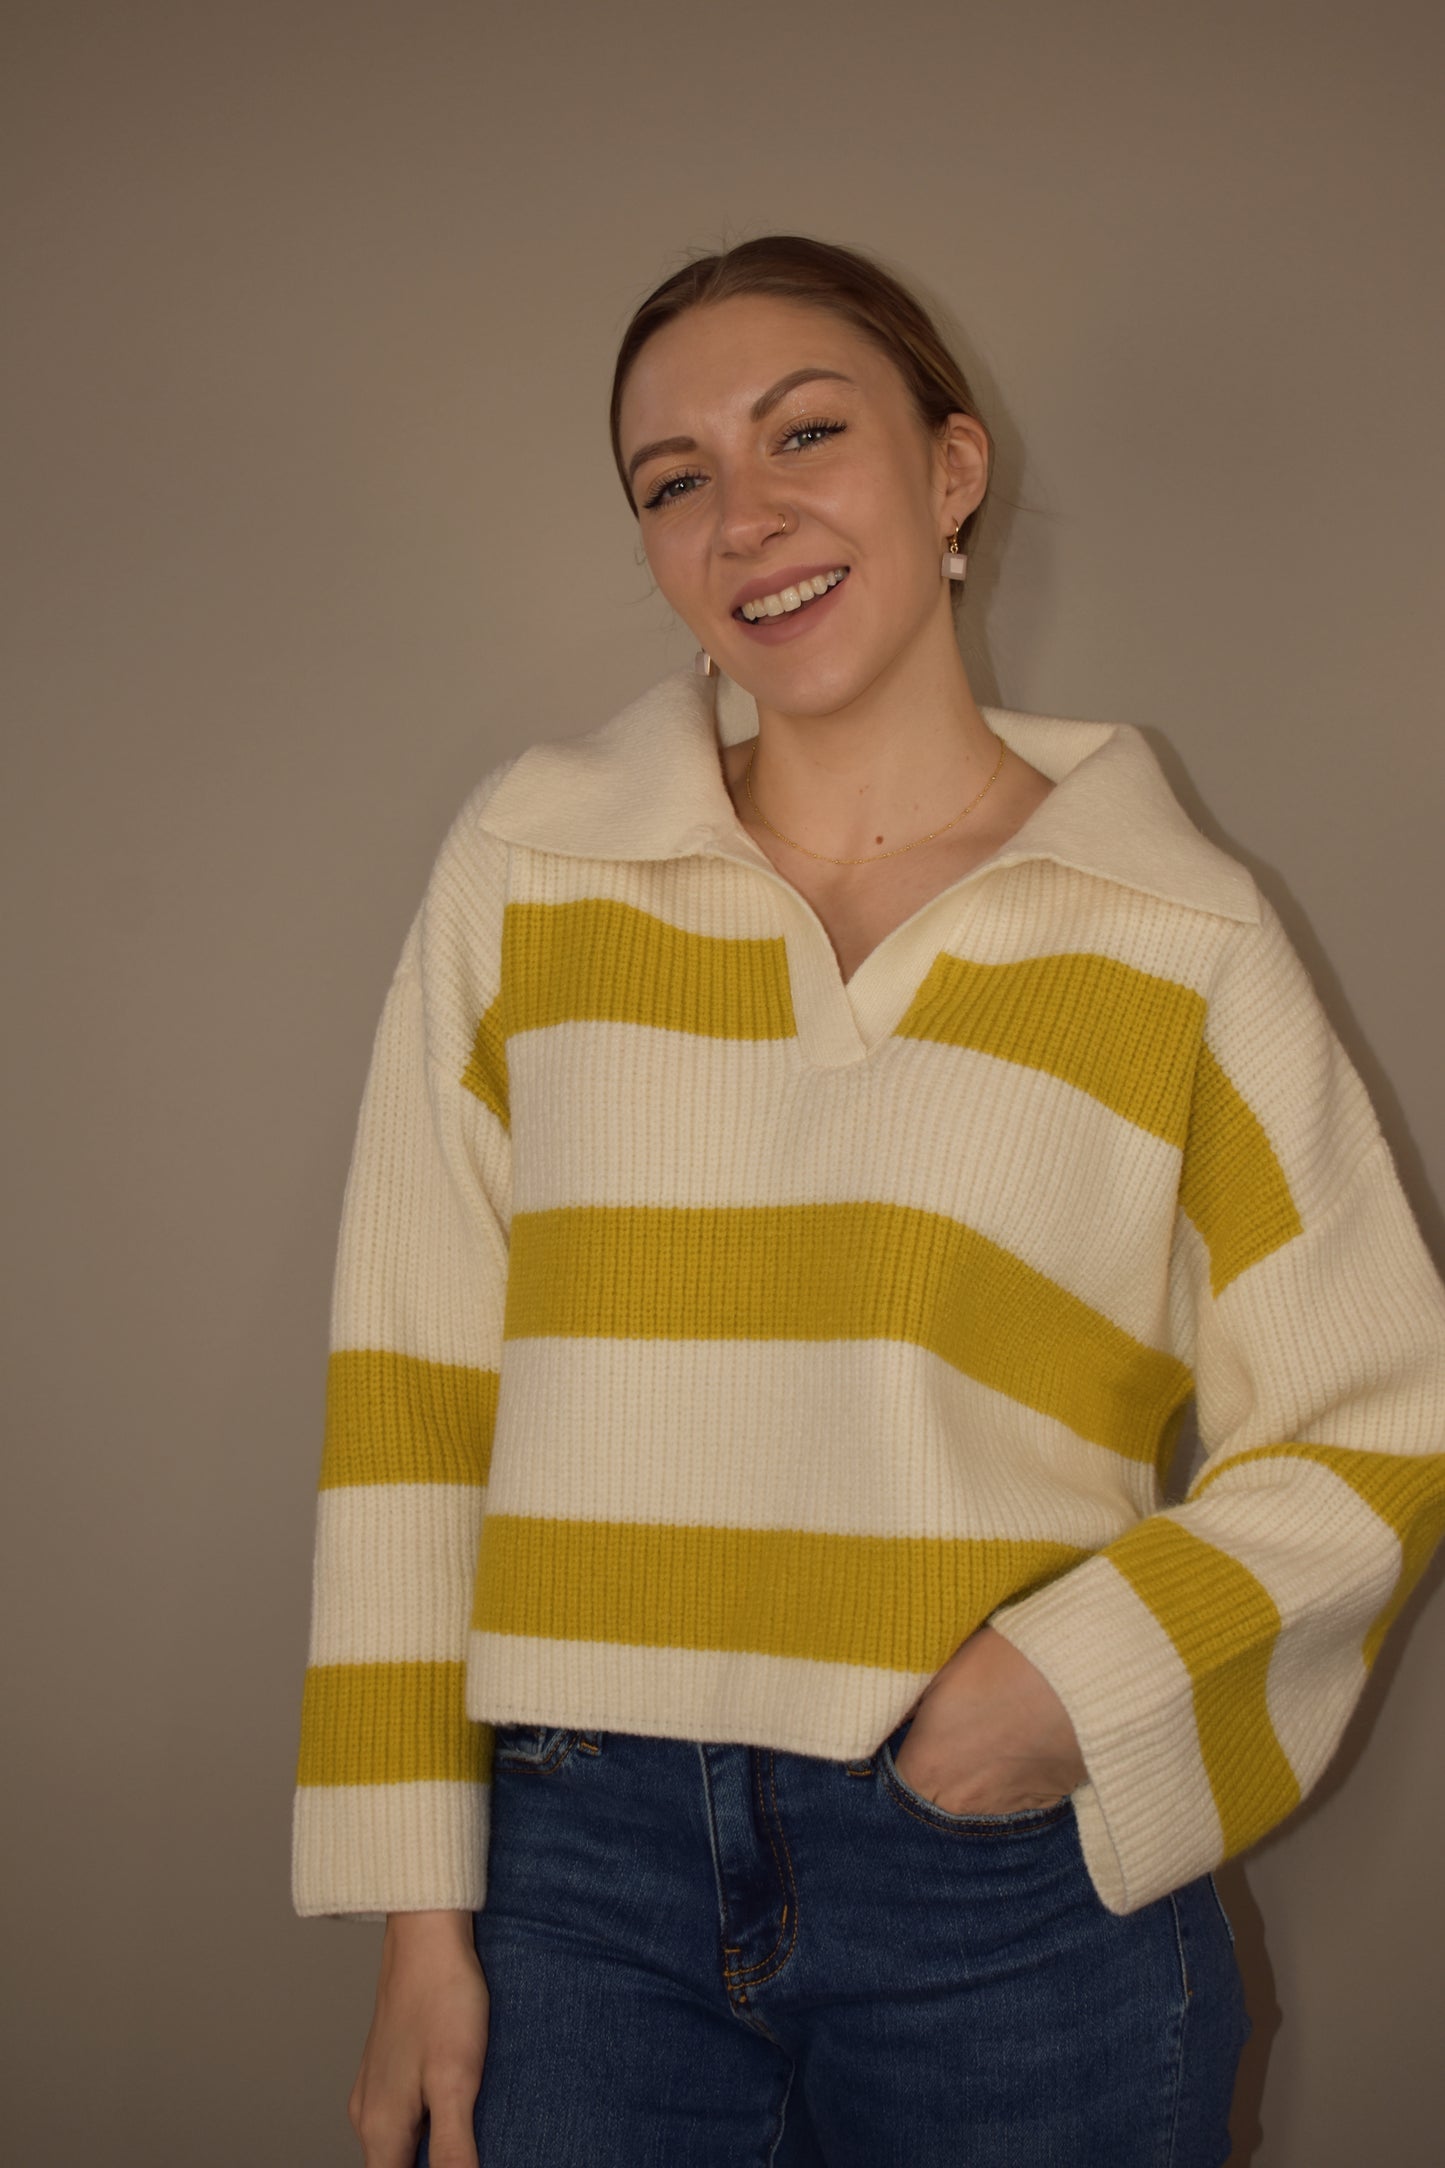 Loose fitting collared sweater with thick mustard colored stripes and a cream background and collar. Color is wide. Slight V neck. Waist length. 